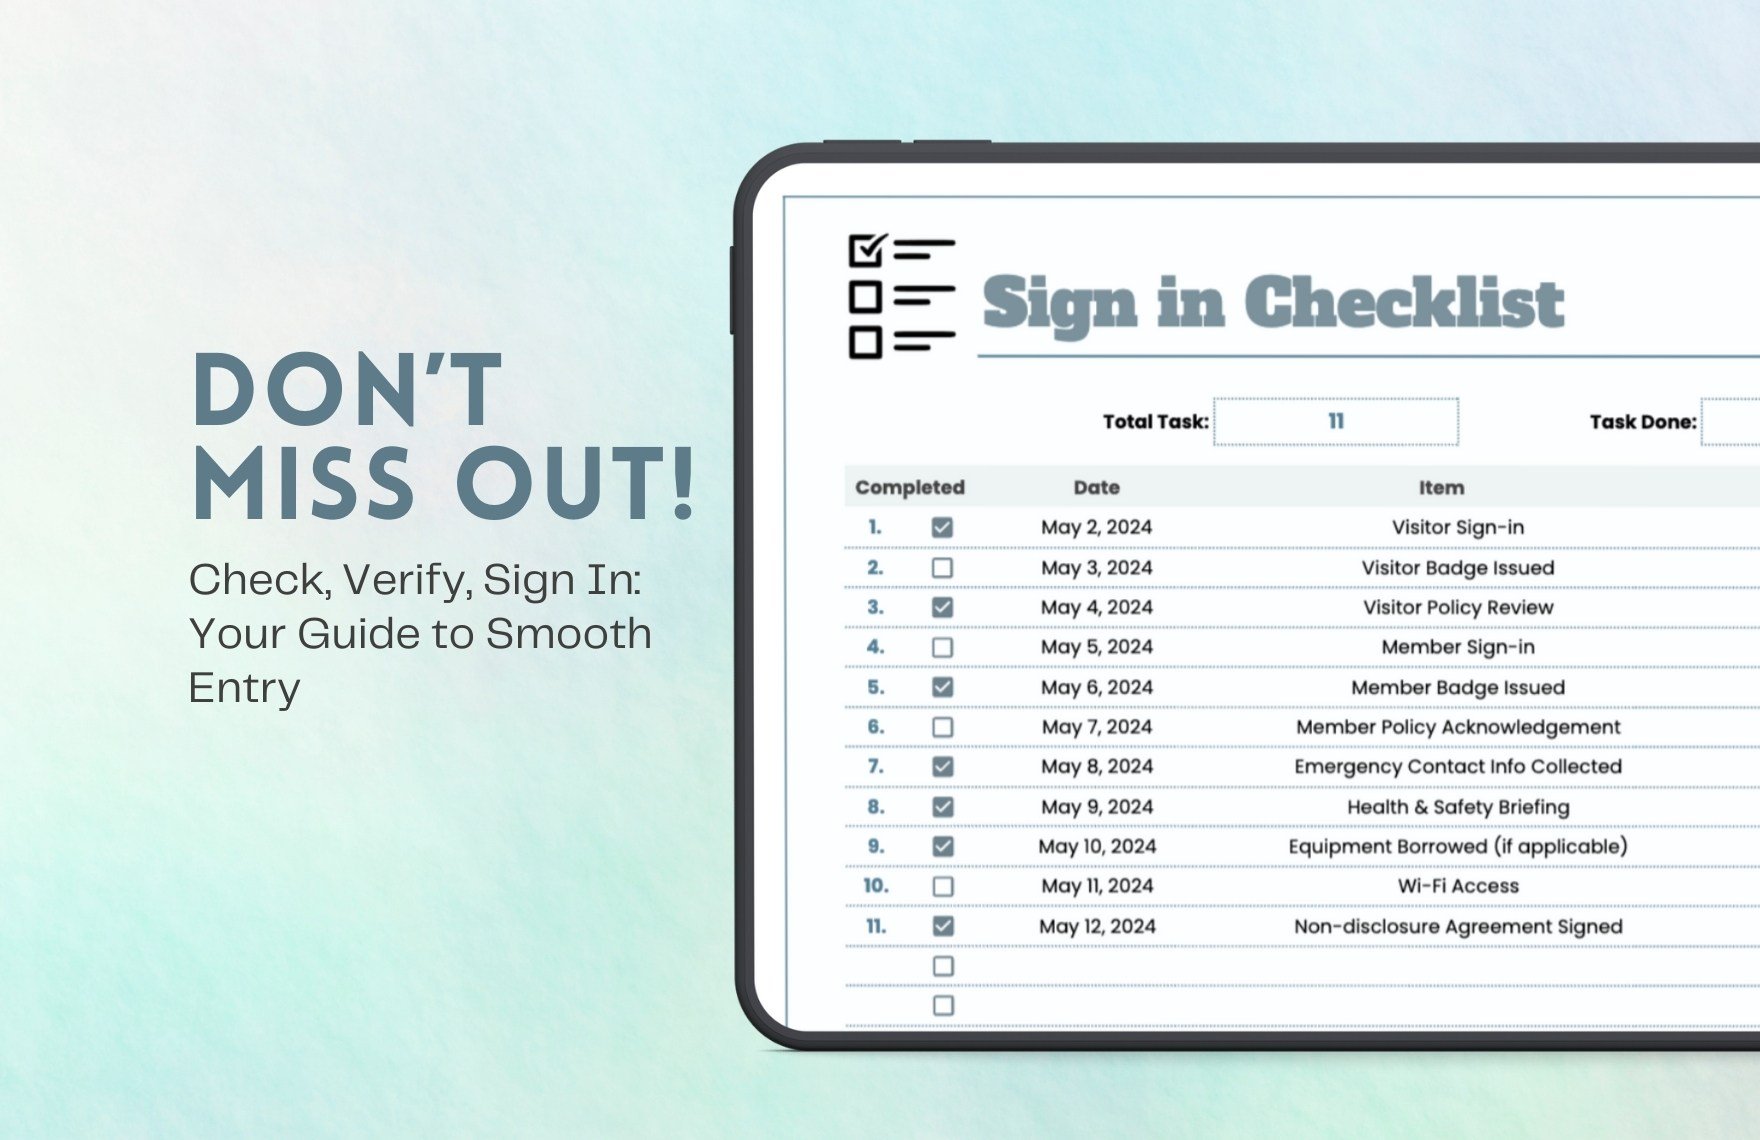 Sign in Checklist Template